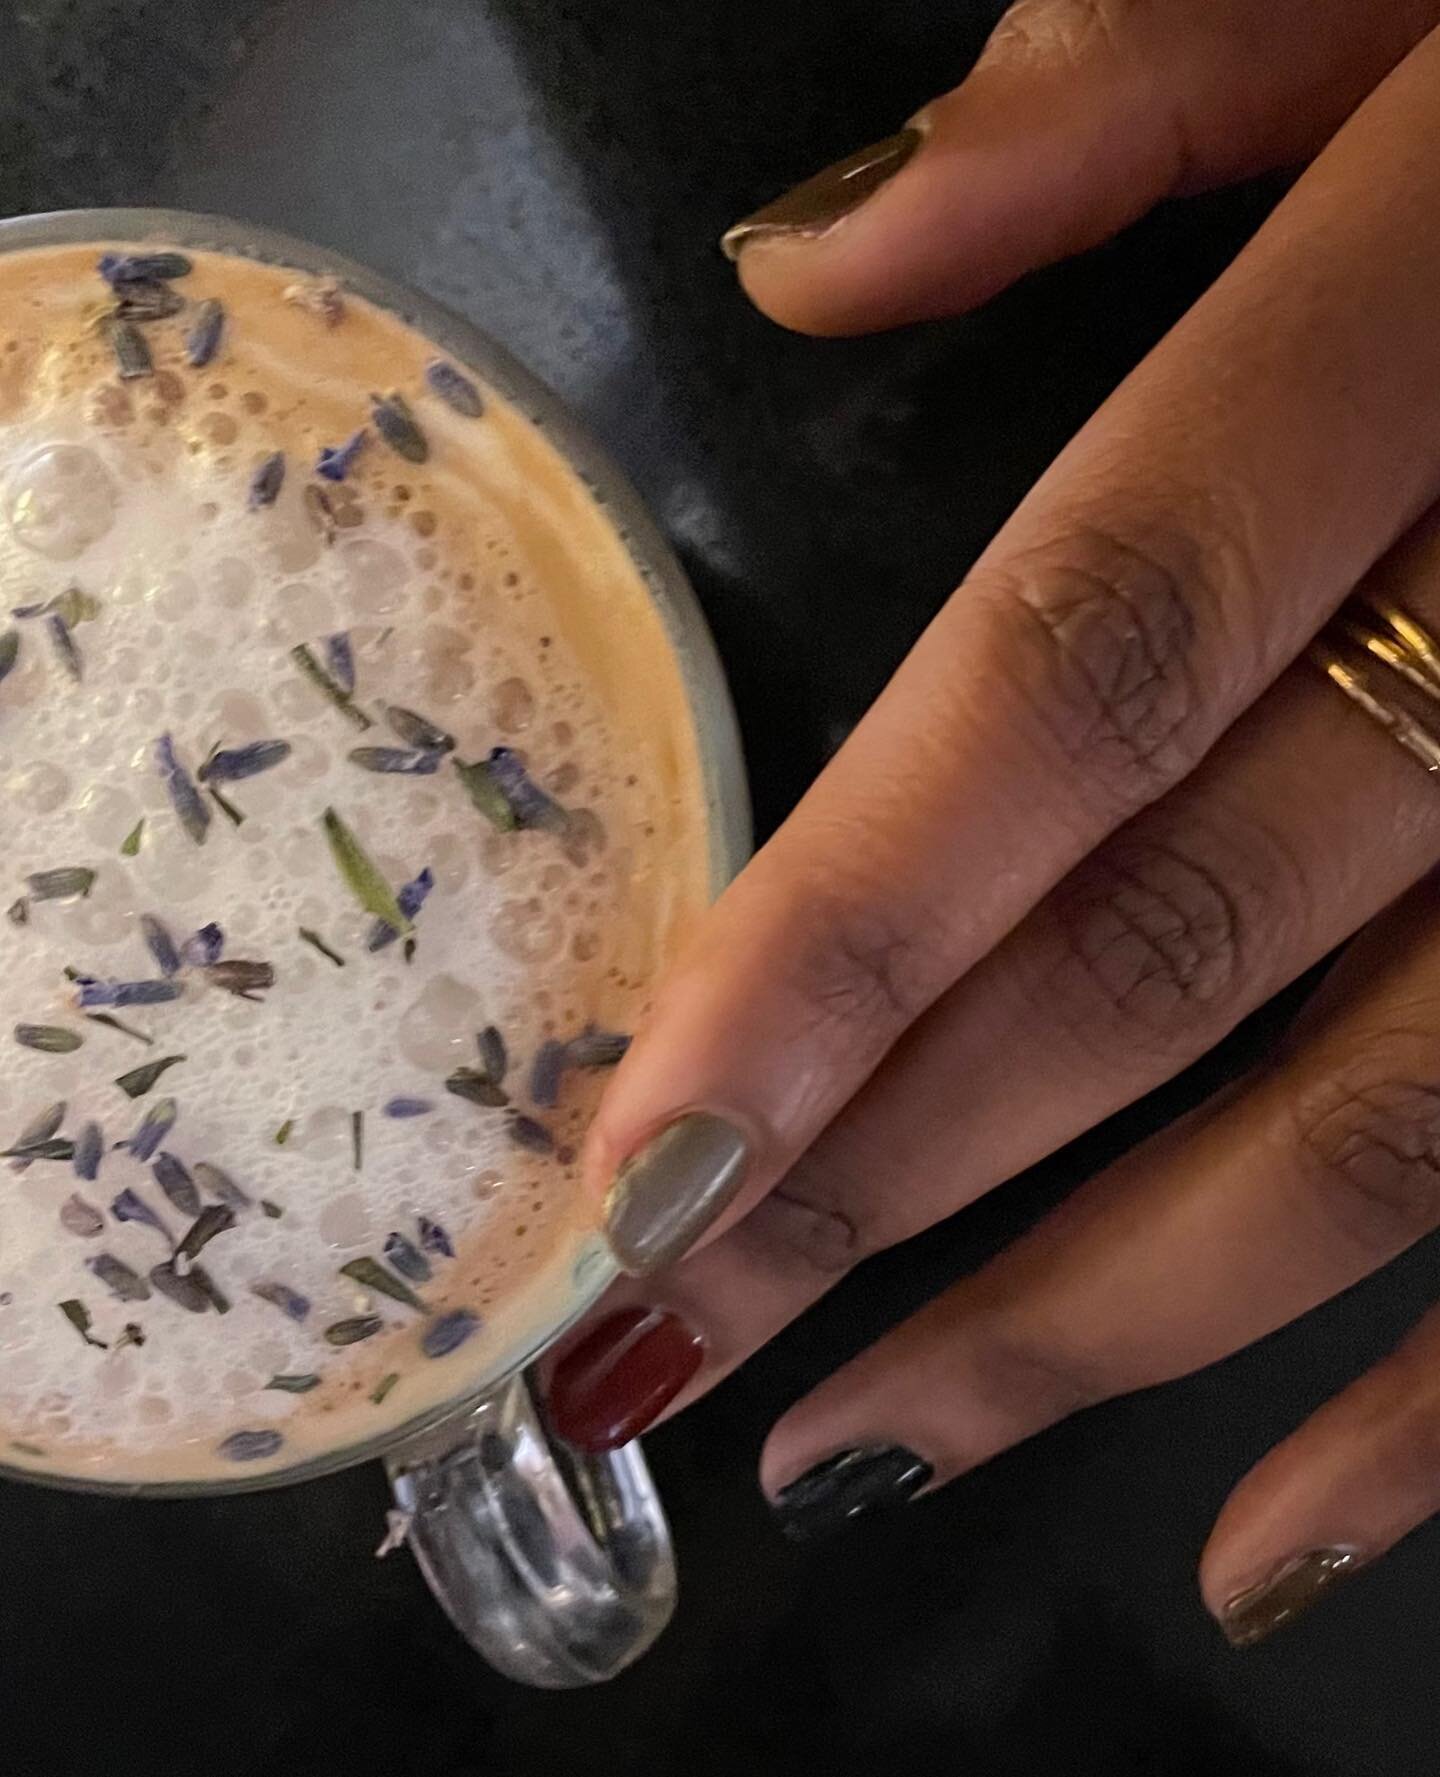 *contains a PR polish

Not much to say here, just a collection of little things that brought joy: matchy-matchy shirt skittles, soy lattes with lavender and good friends, and sweet, tender baby cats.

Painted on: 

natural nails

Polishes (lacquer) u